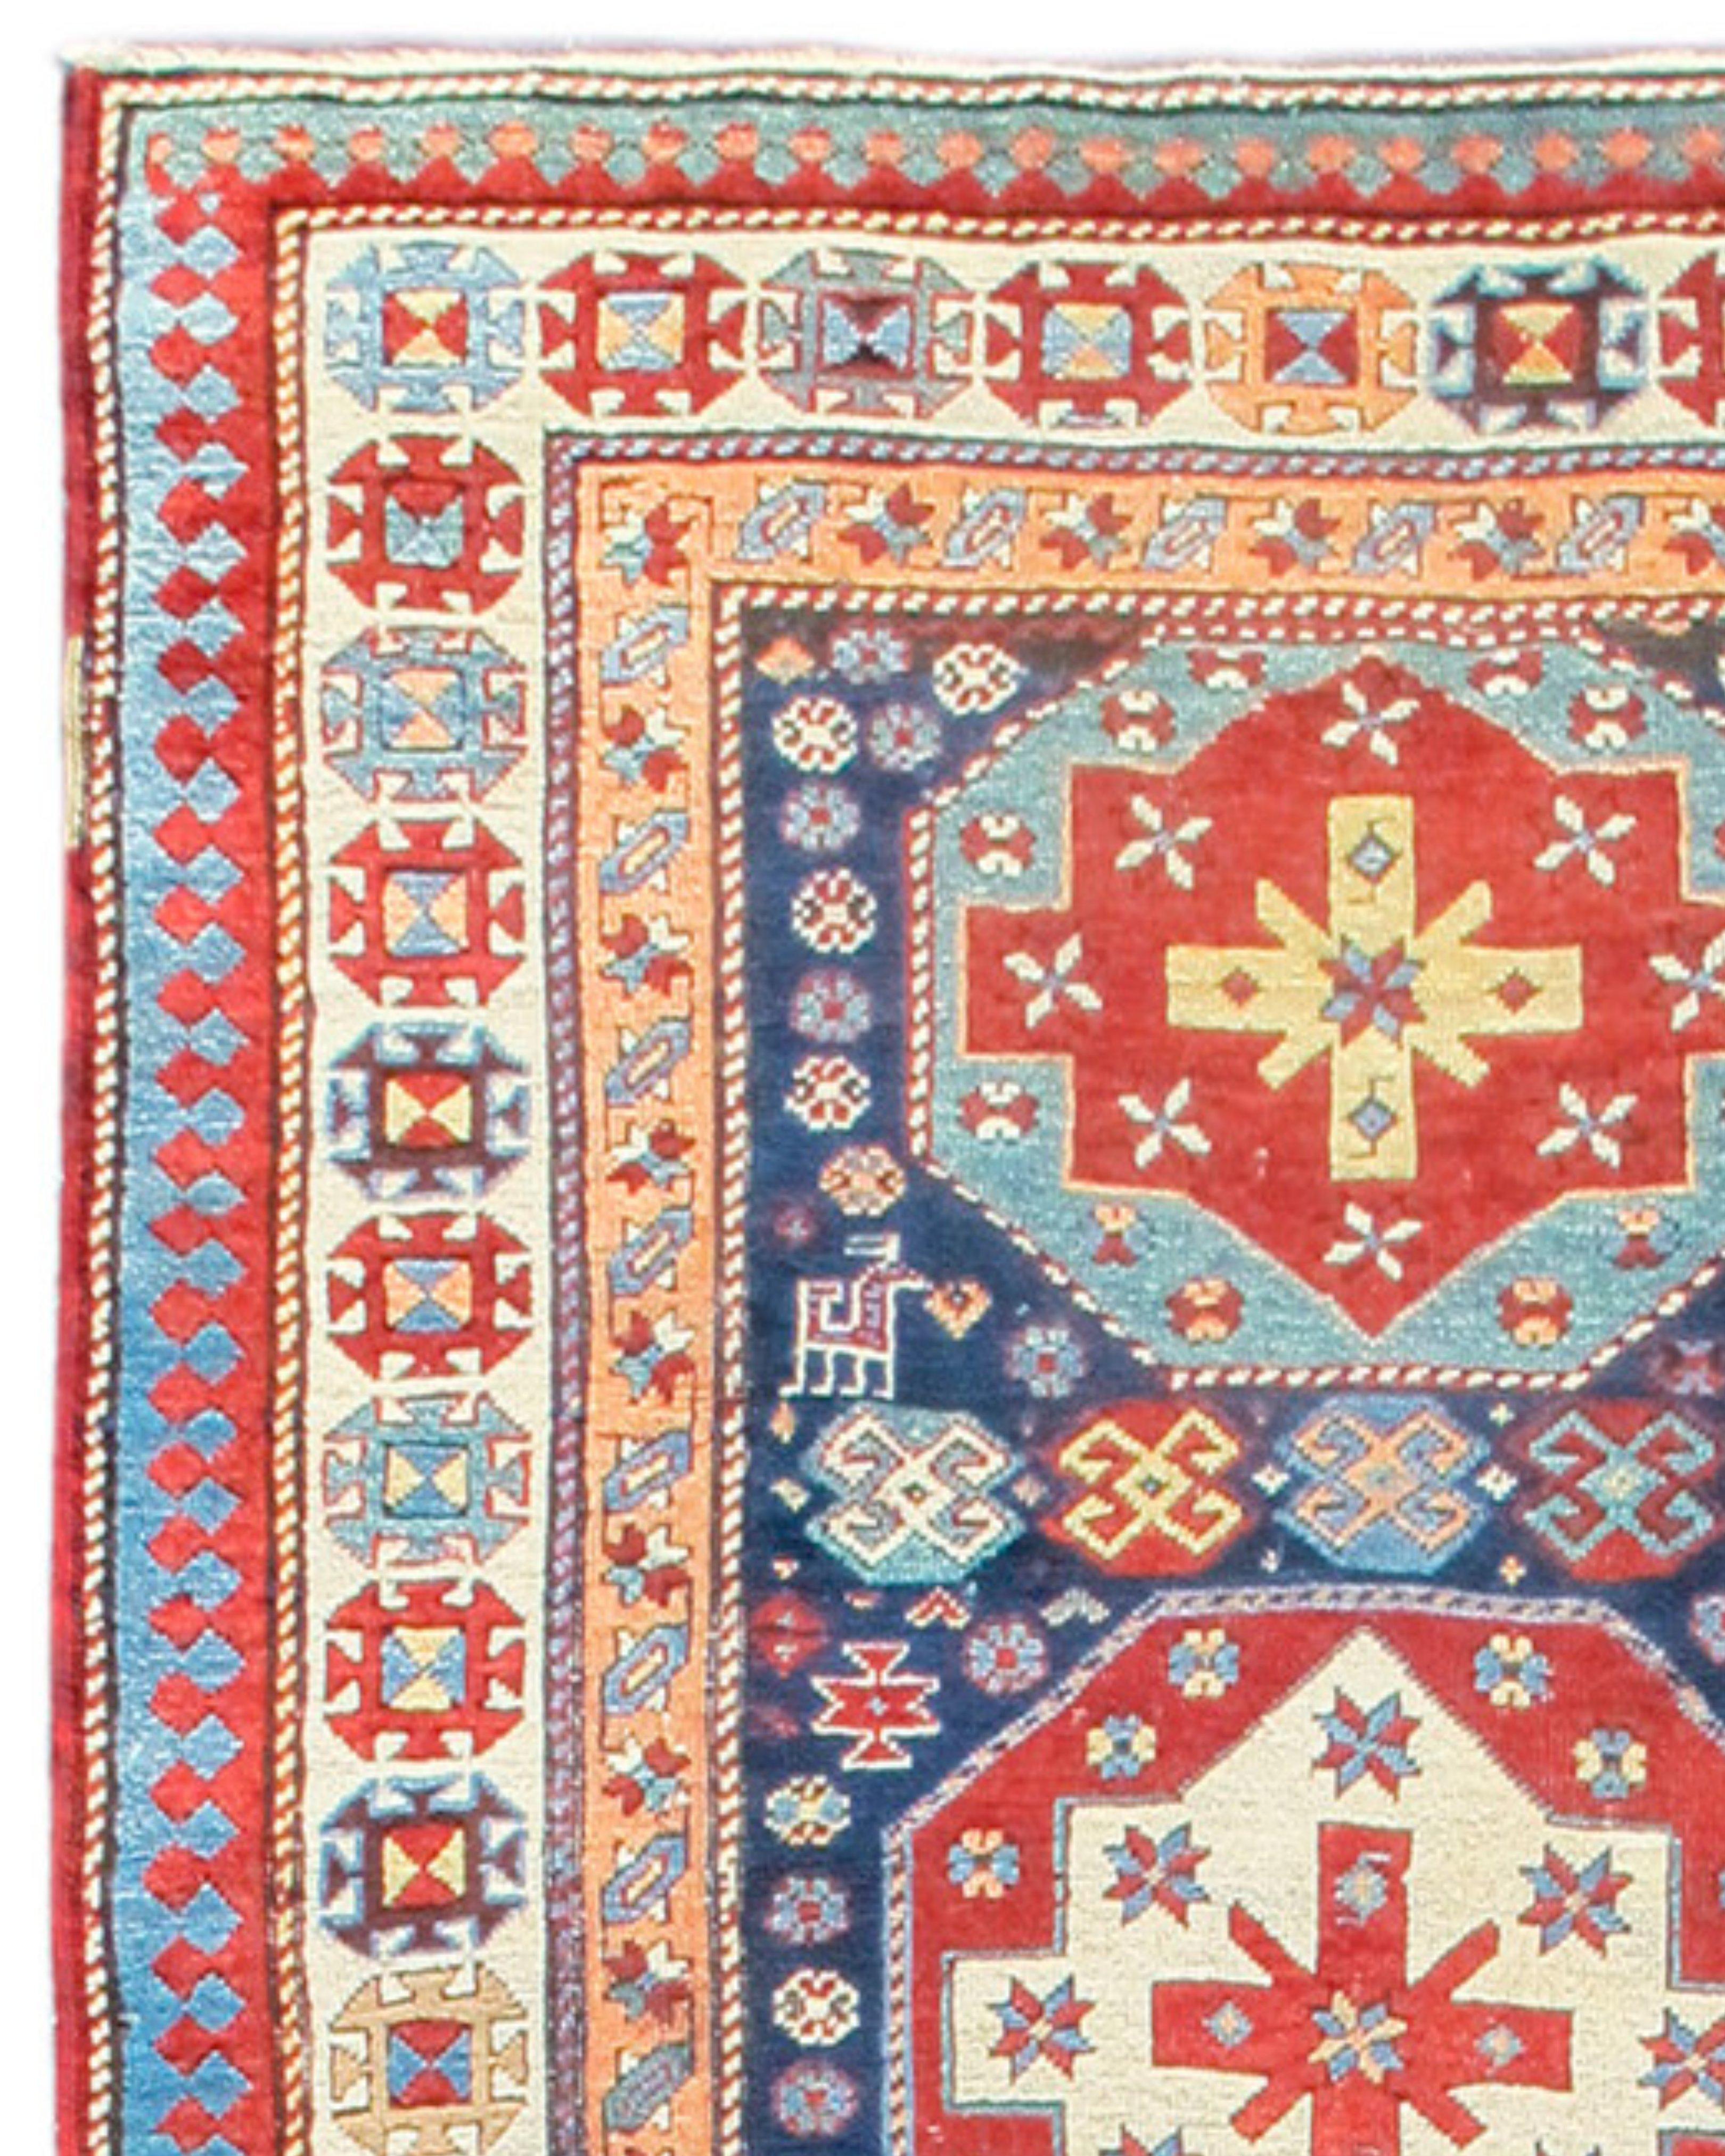 Trans-Caucasian Runner Rug, Late 19th century

Additional Information:
Dimensions: 3'8